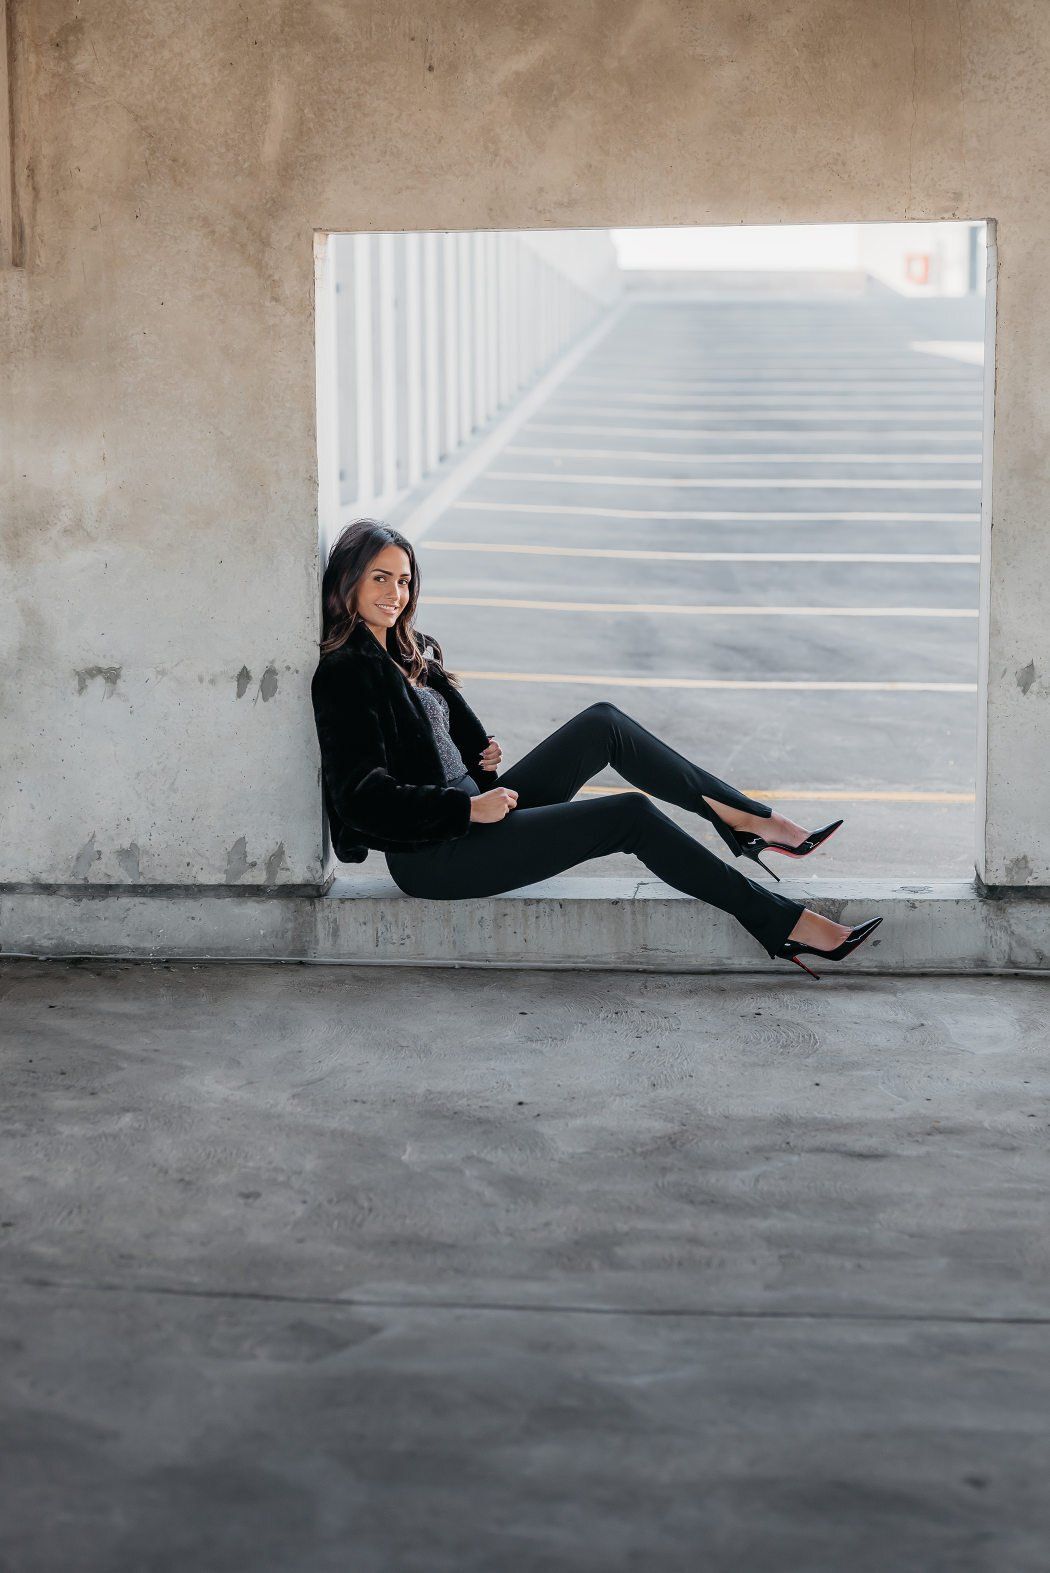 Social influencer Chantel in a casual black outfit sitting on concrete floor